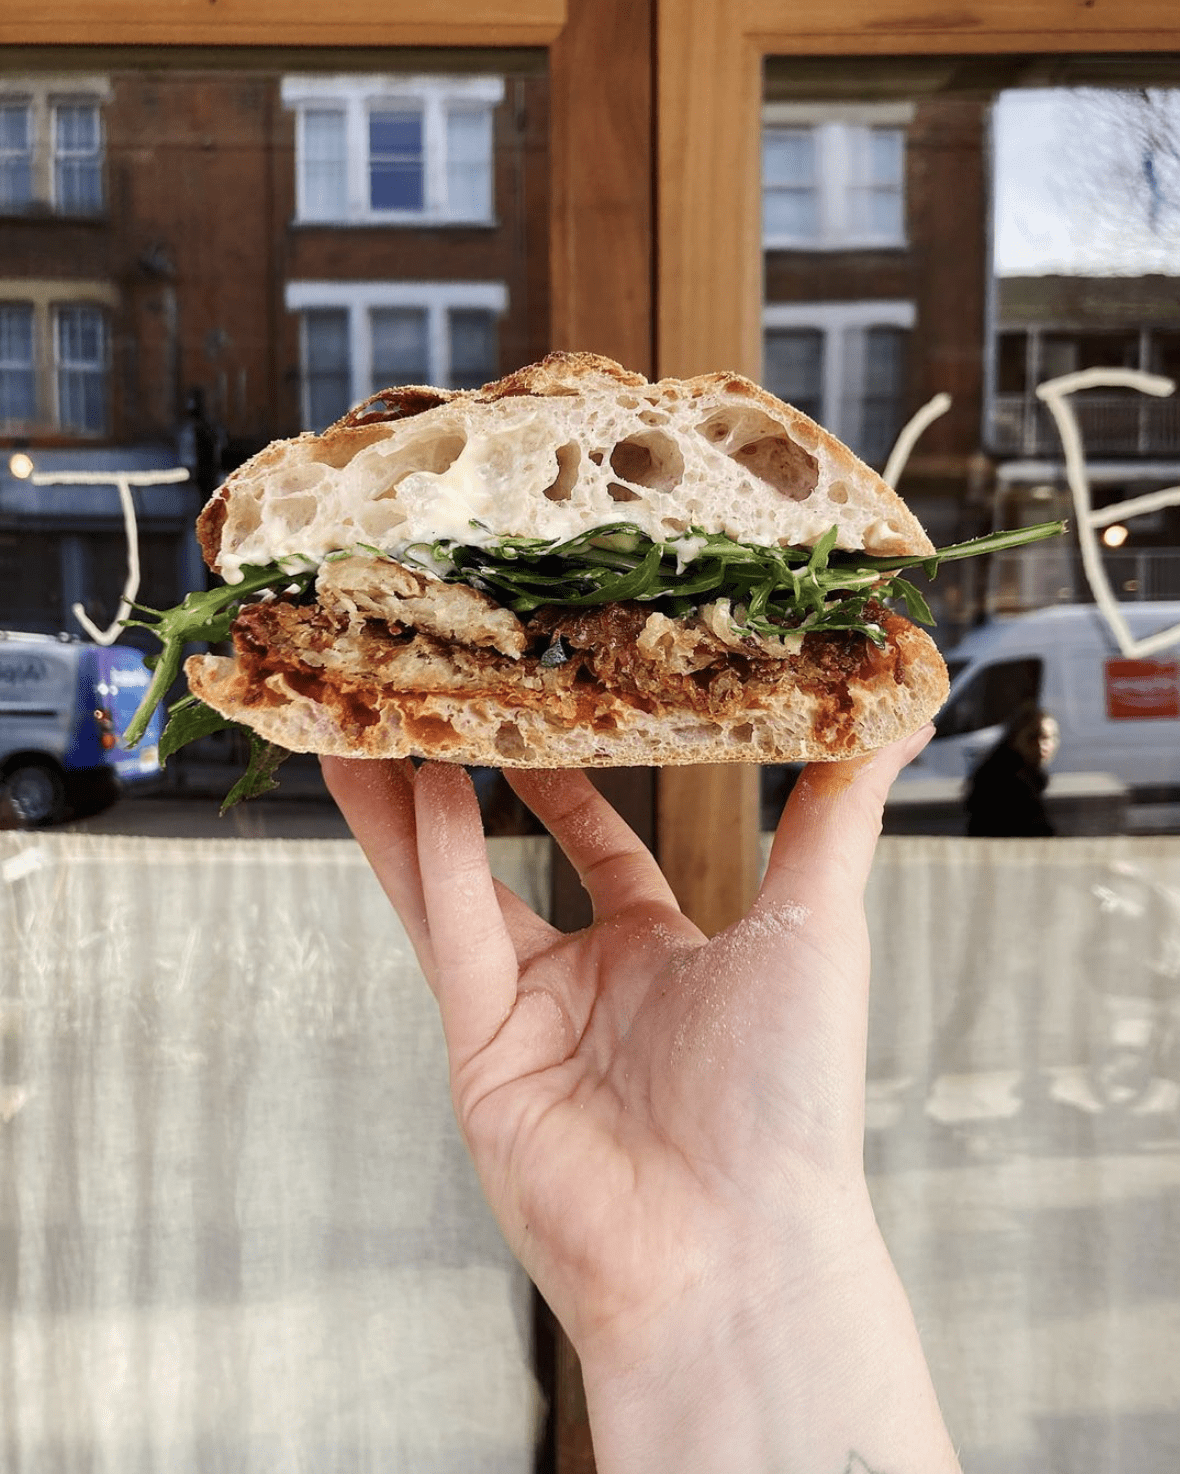 The best places for remote working in London | A sandwich presented at Big Jo